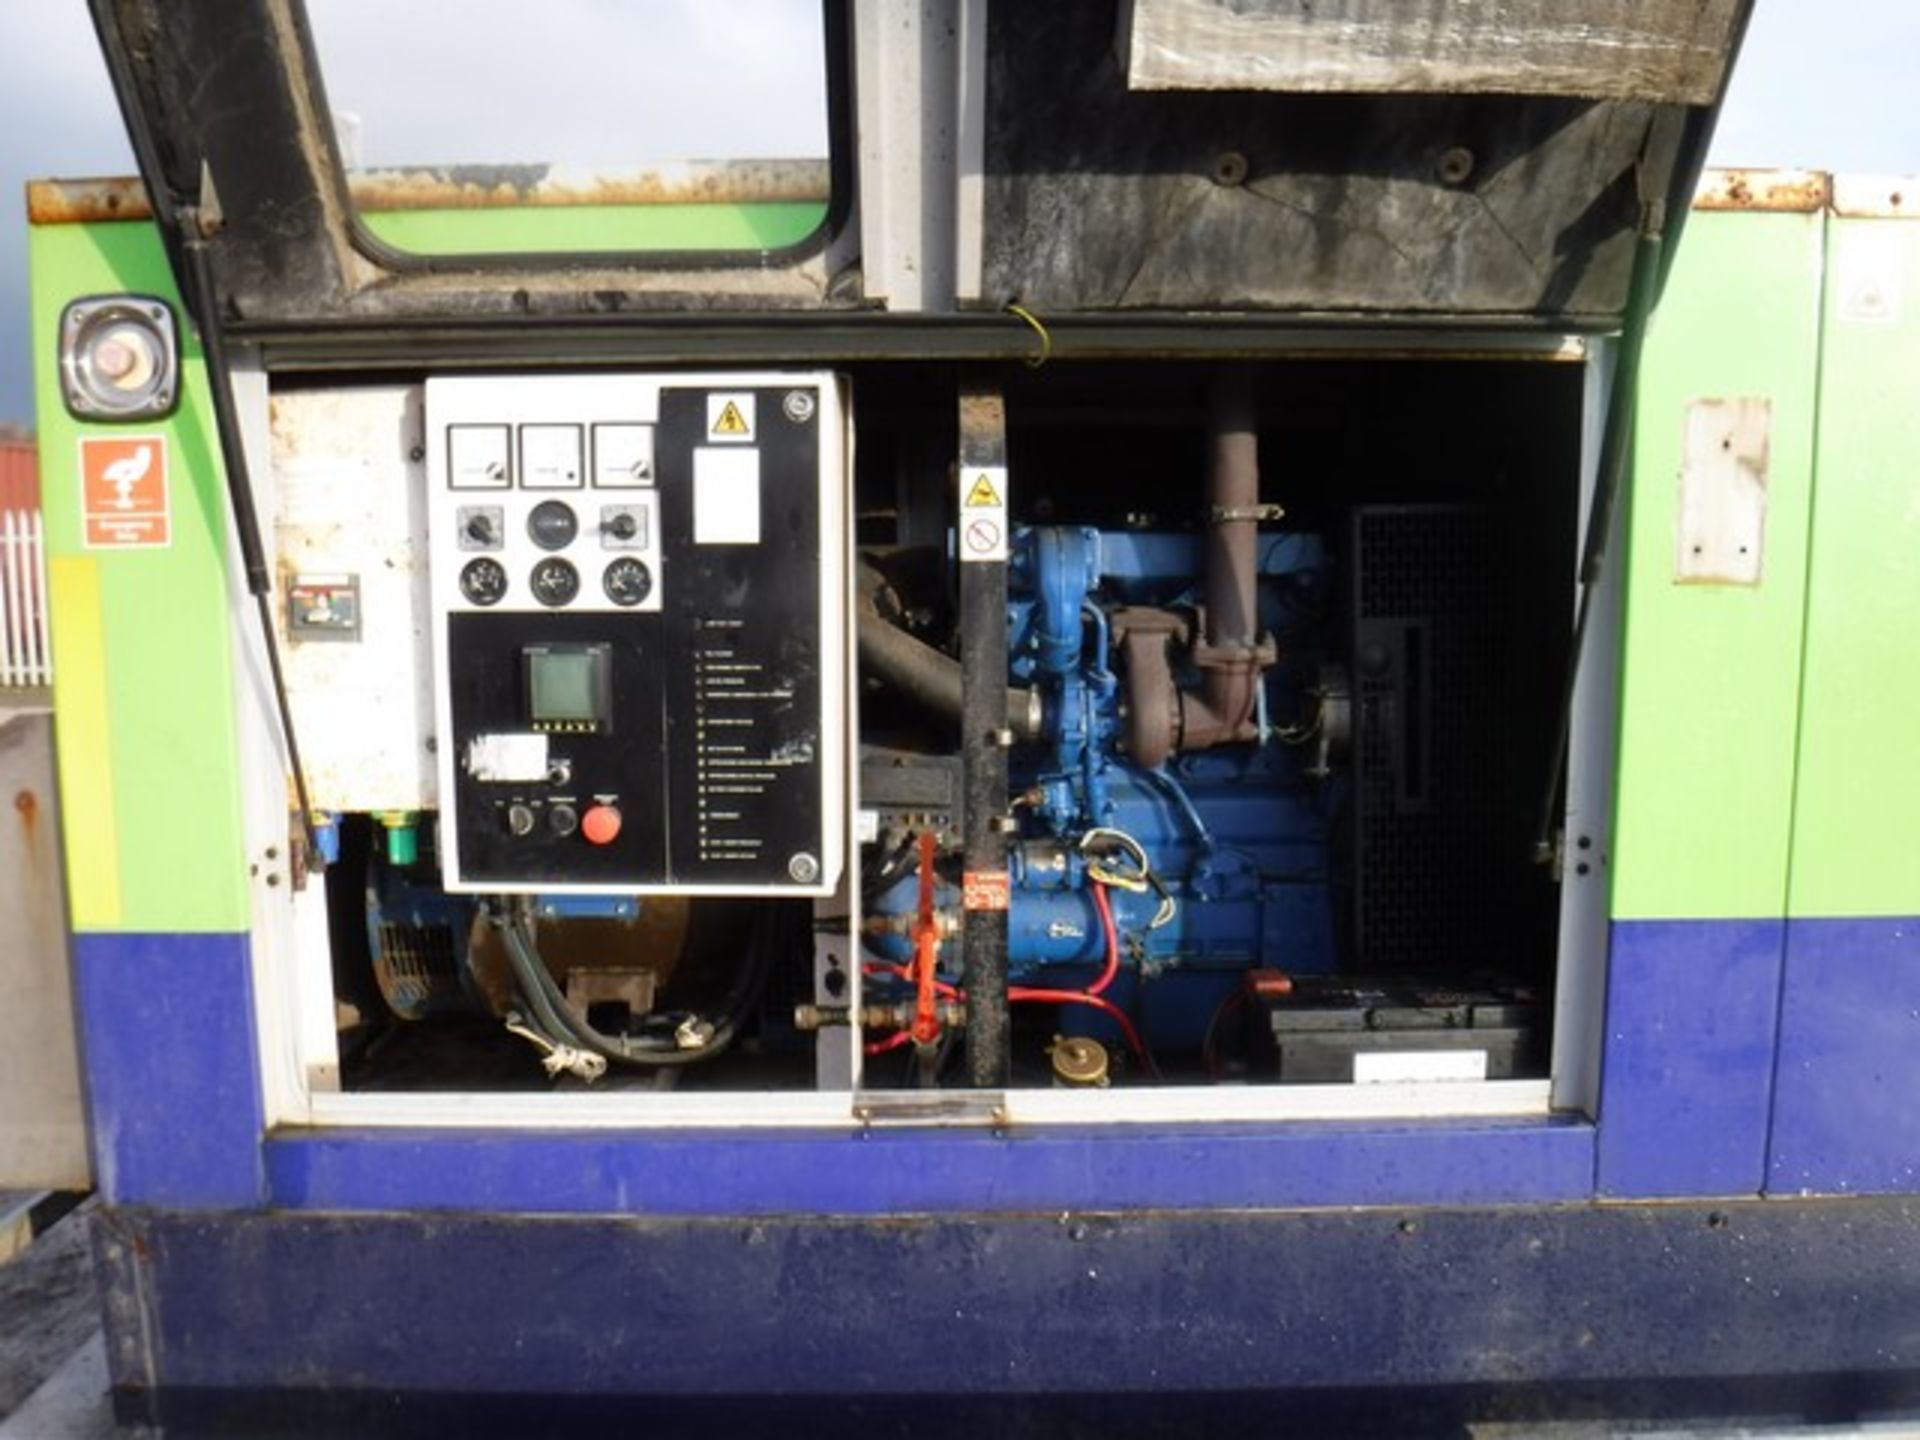 F.G. Wilson LCH 60KVA diesel generator on twin axle trailer 14253 hrs (not verified) ID no. 60-33 S - Image 5 of 9